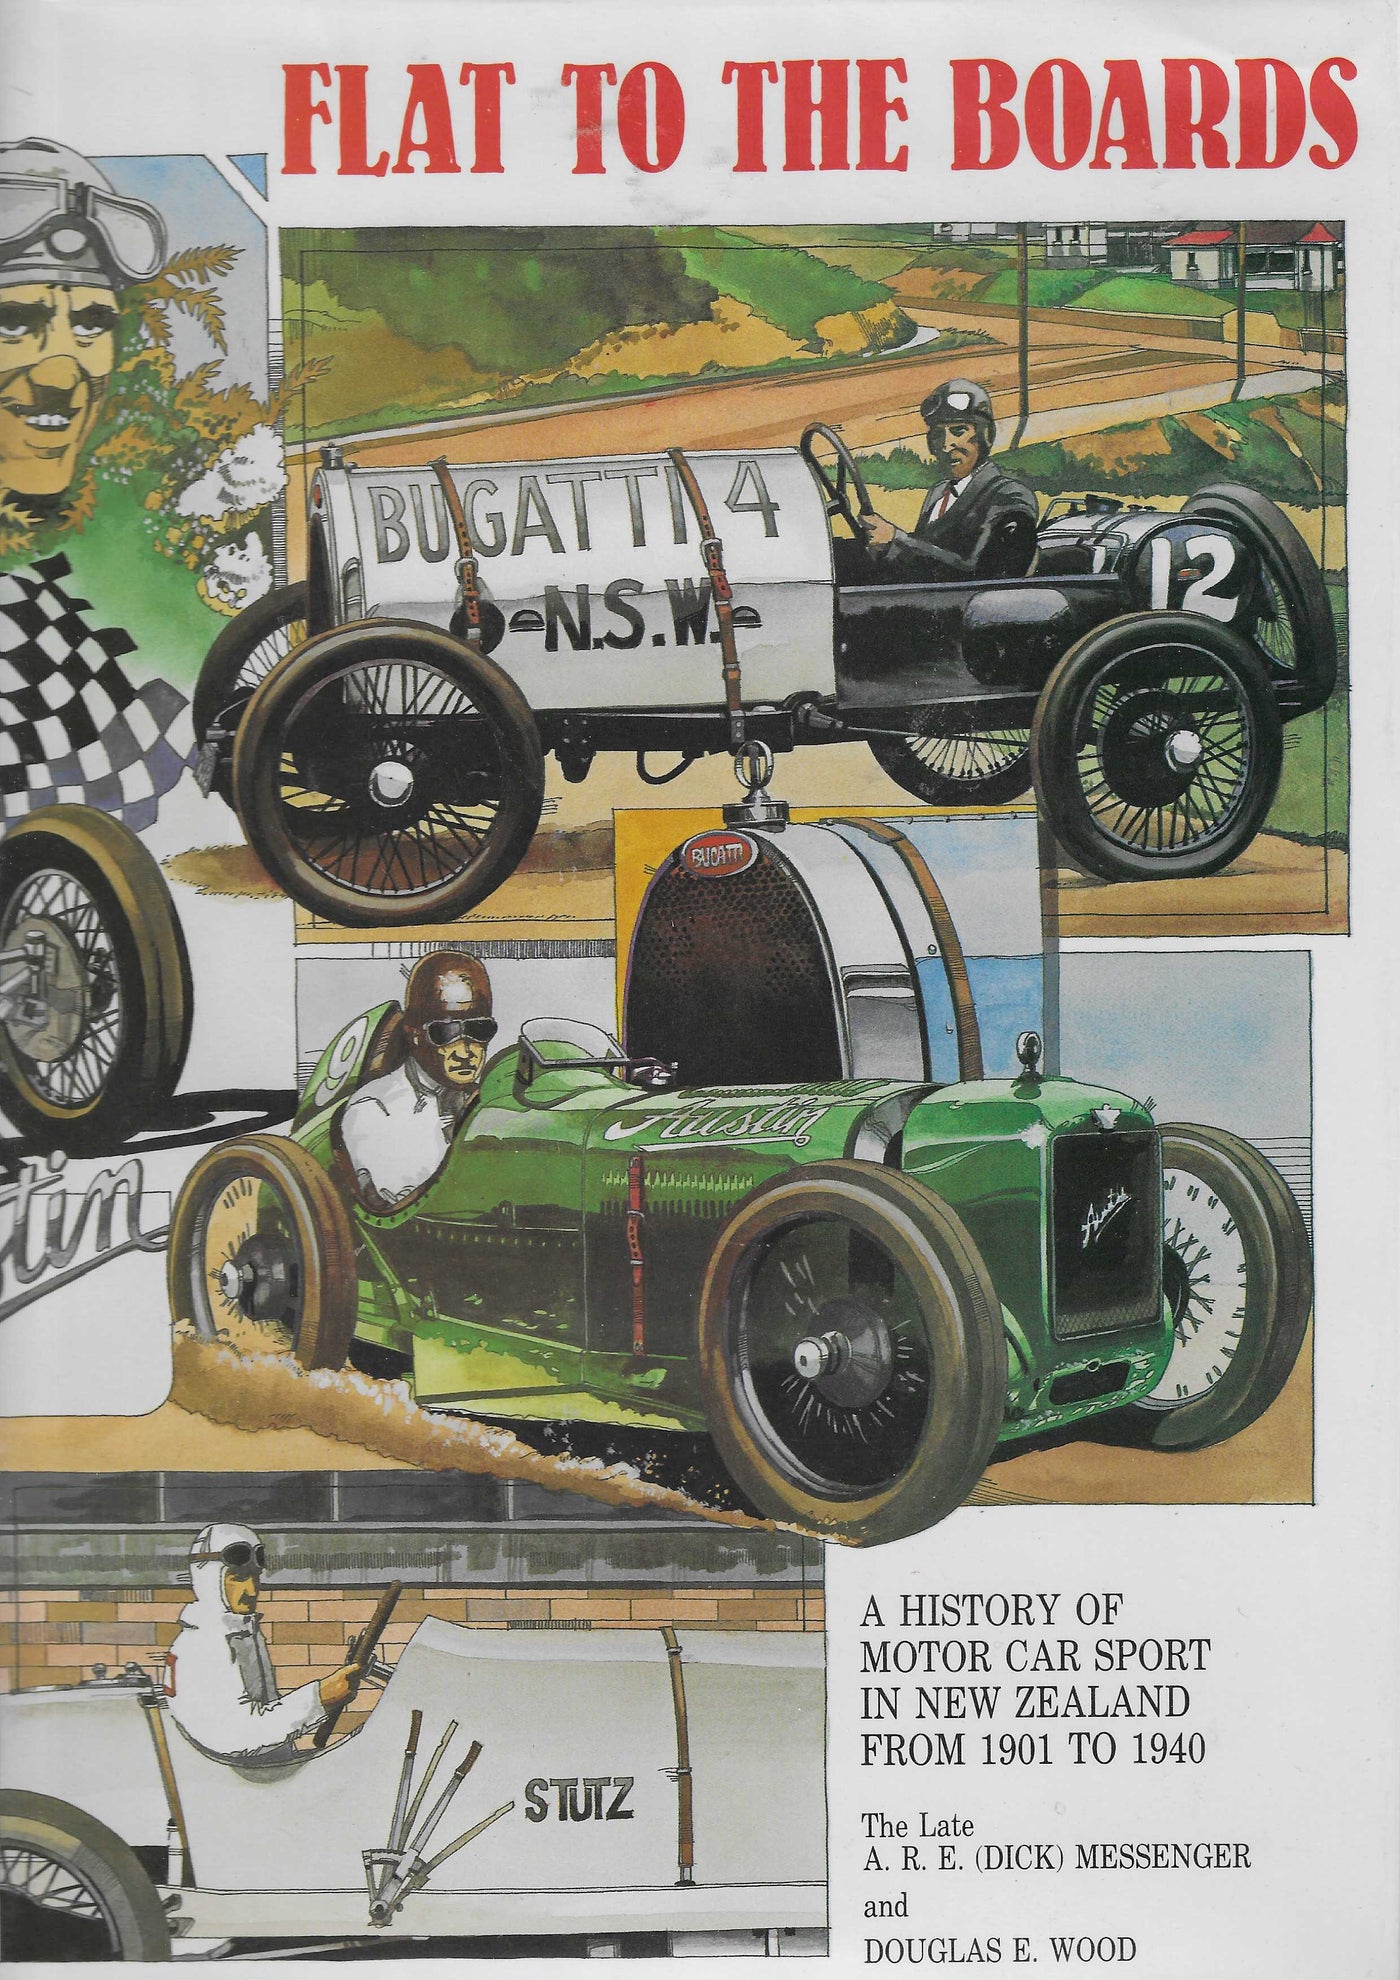 Flat to the Boards: A History of Motor Car Sport in New Zealand from 1901 to 1940